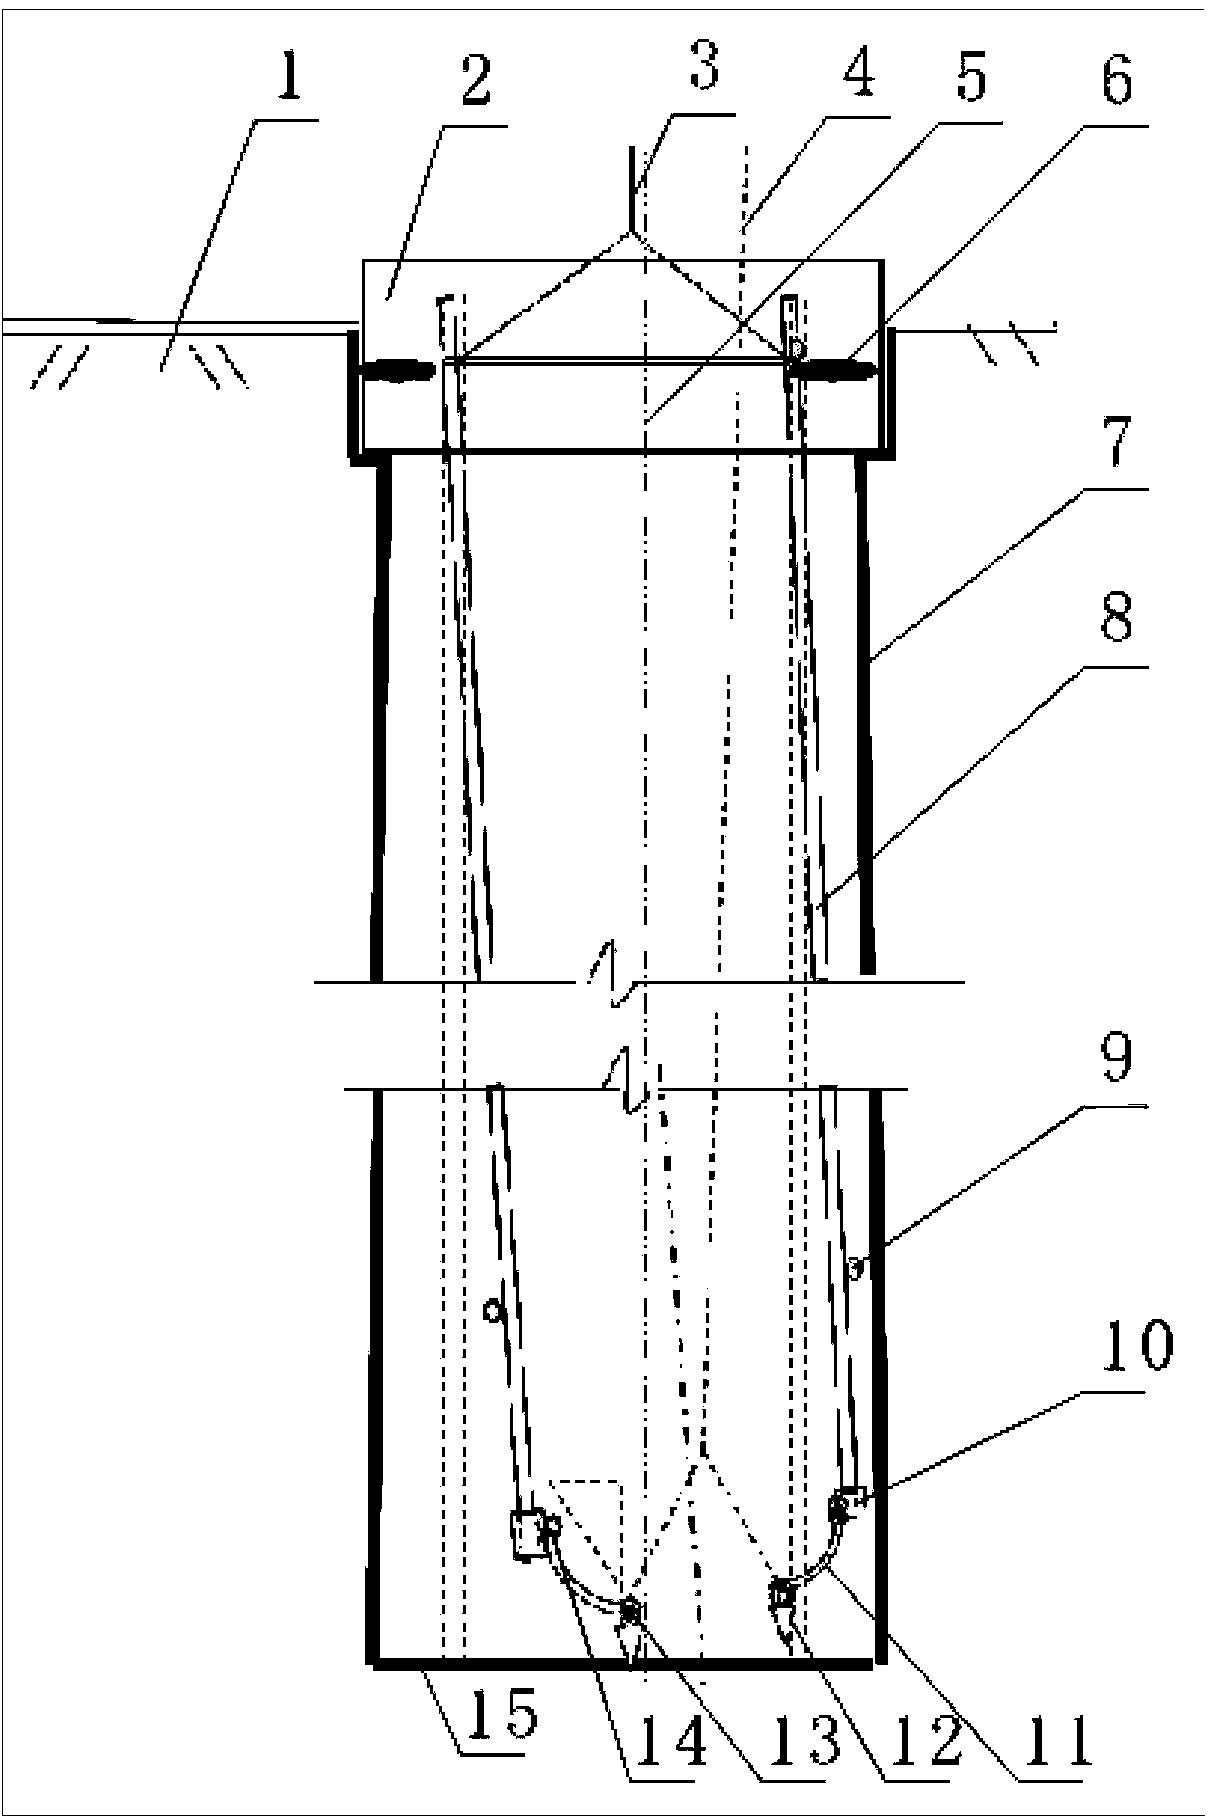 Perpendicularity regulating method for foundation cast-in-place pile steel bar cage of power transmission iron tower